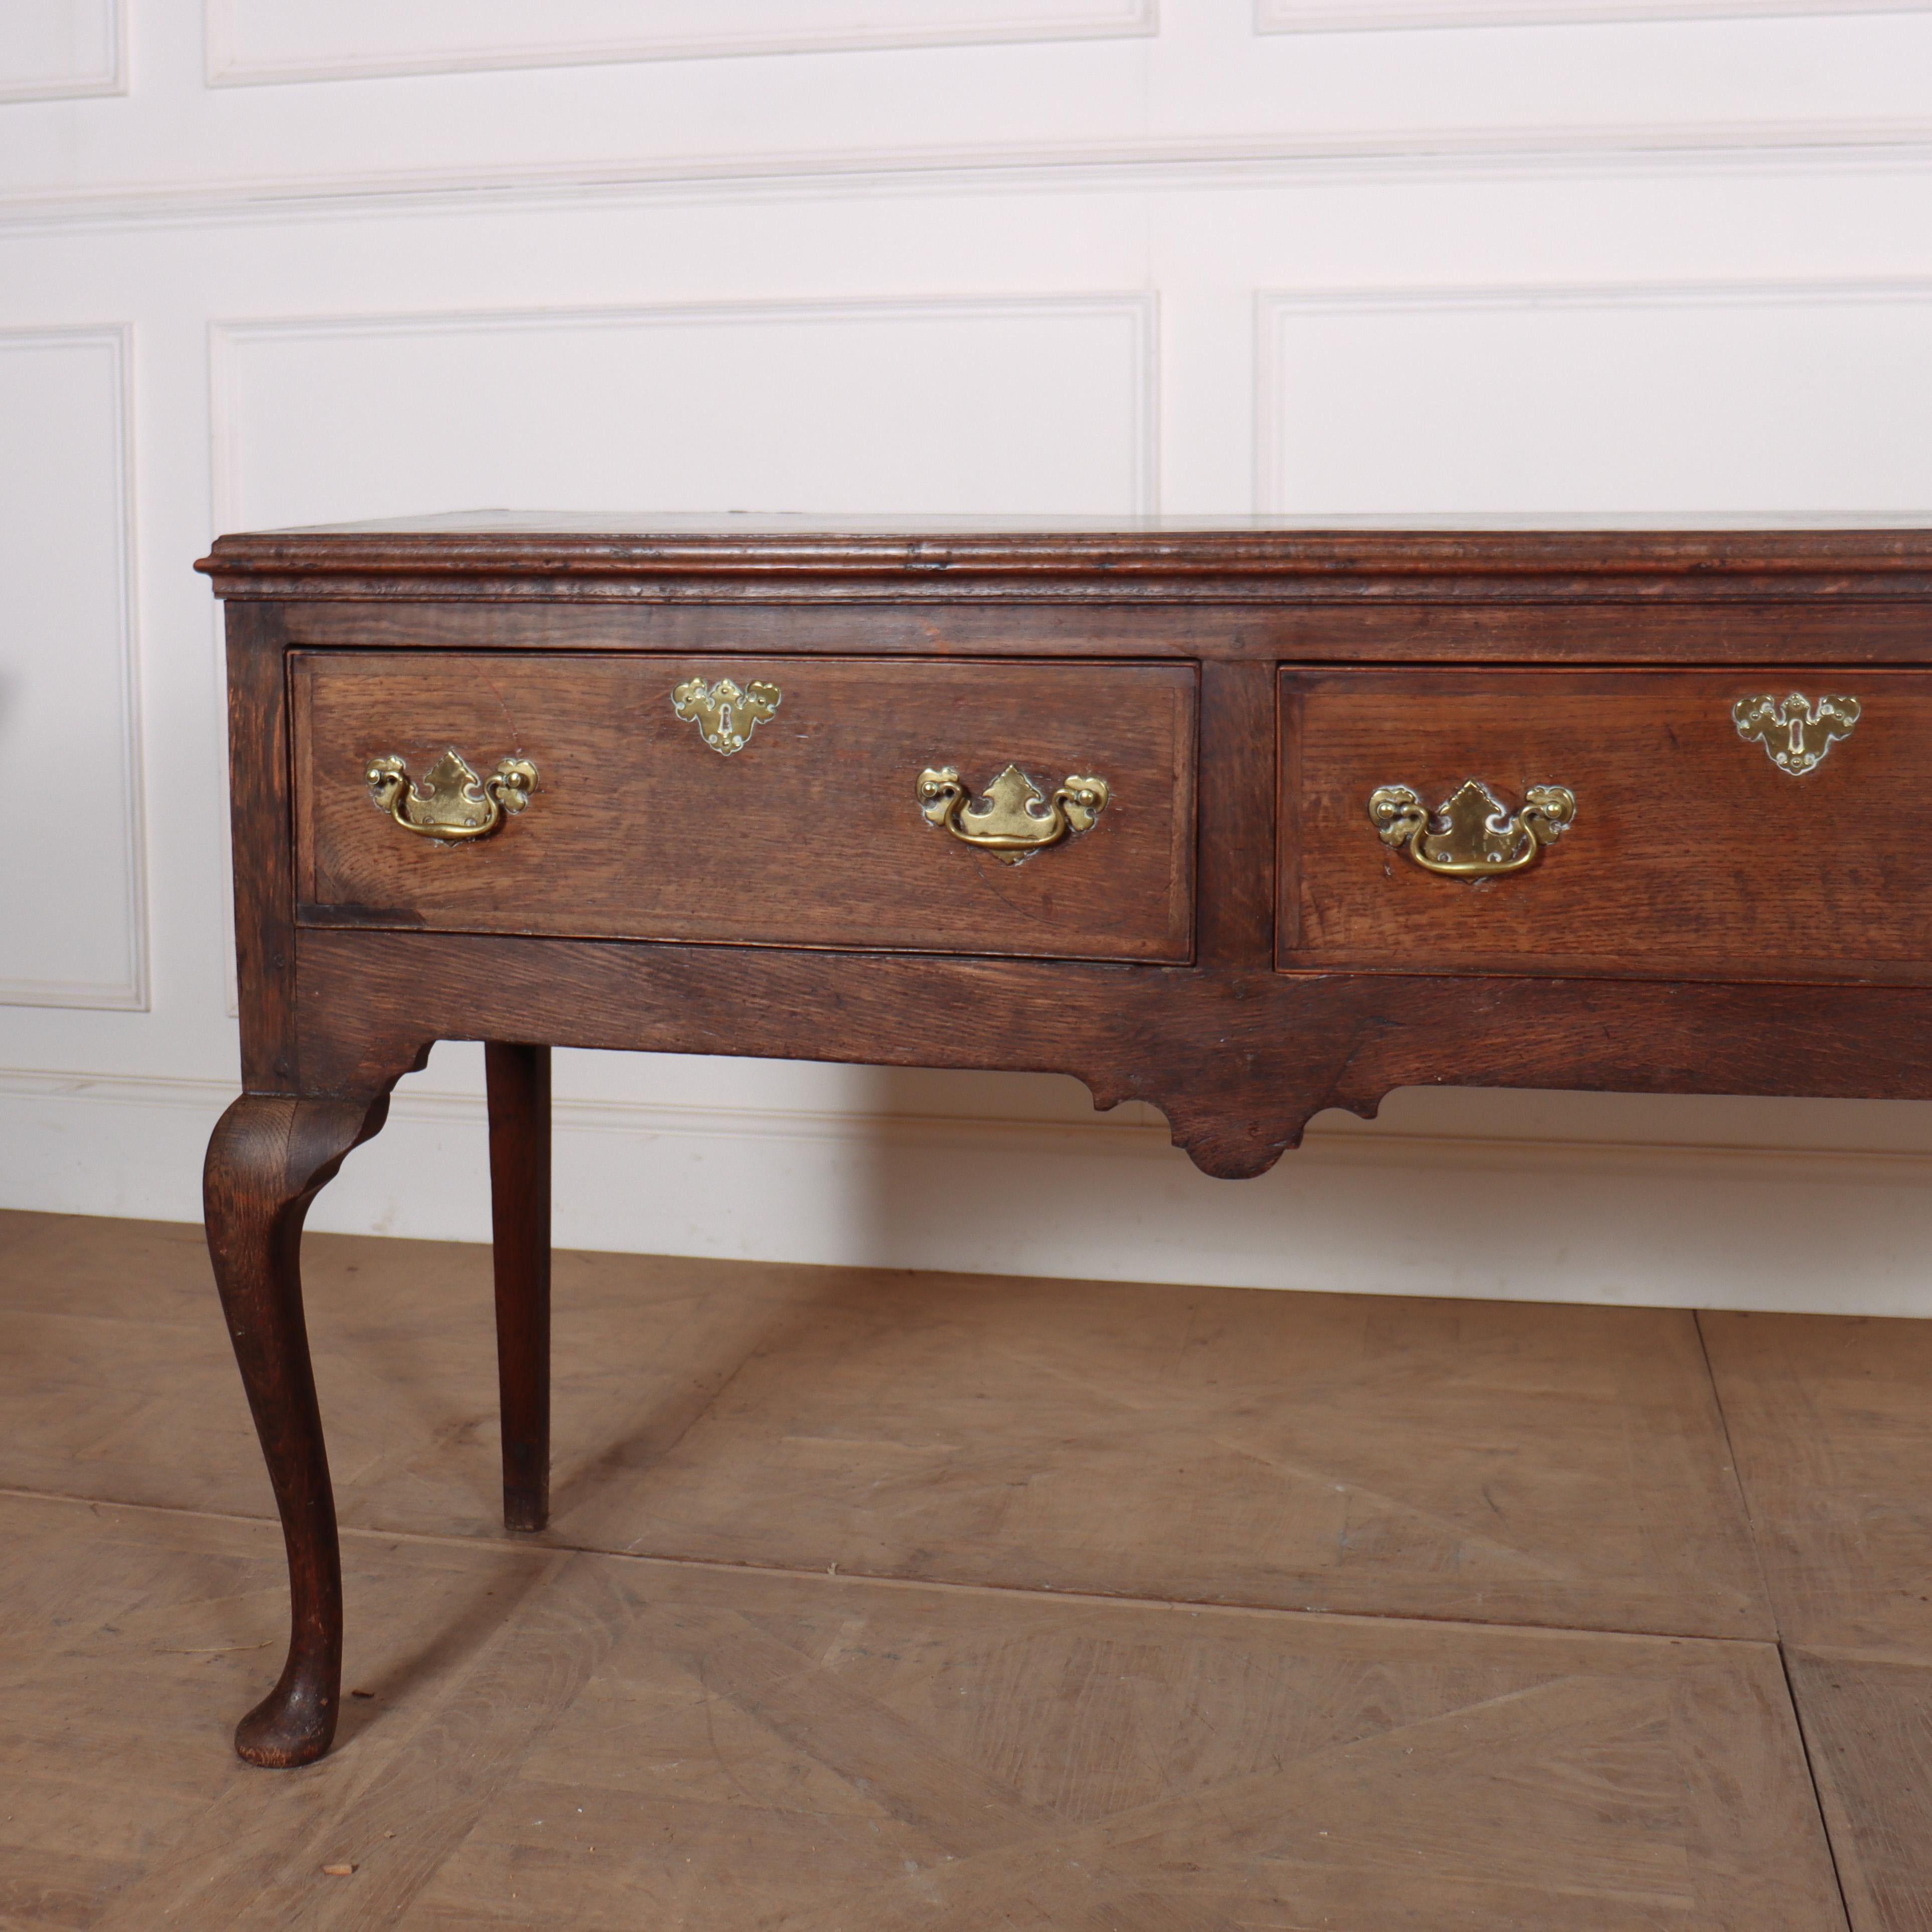 18th C English three drawer oak dresser base with mahogany crossbanding. 1780

Reference: 7981

Dimensions
74.5 inches (189 cms) Wide
21 inches (53 cms) Deep
32 inches (81 cms) High